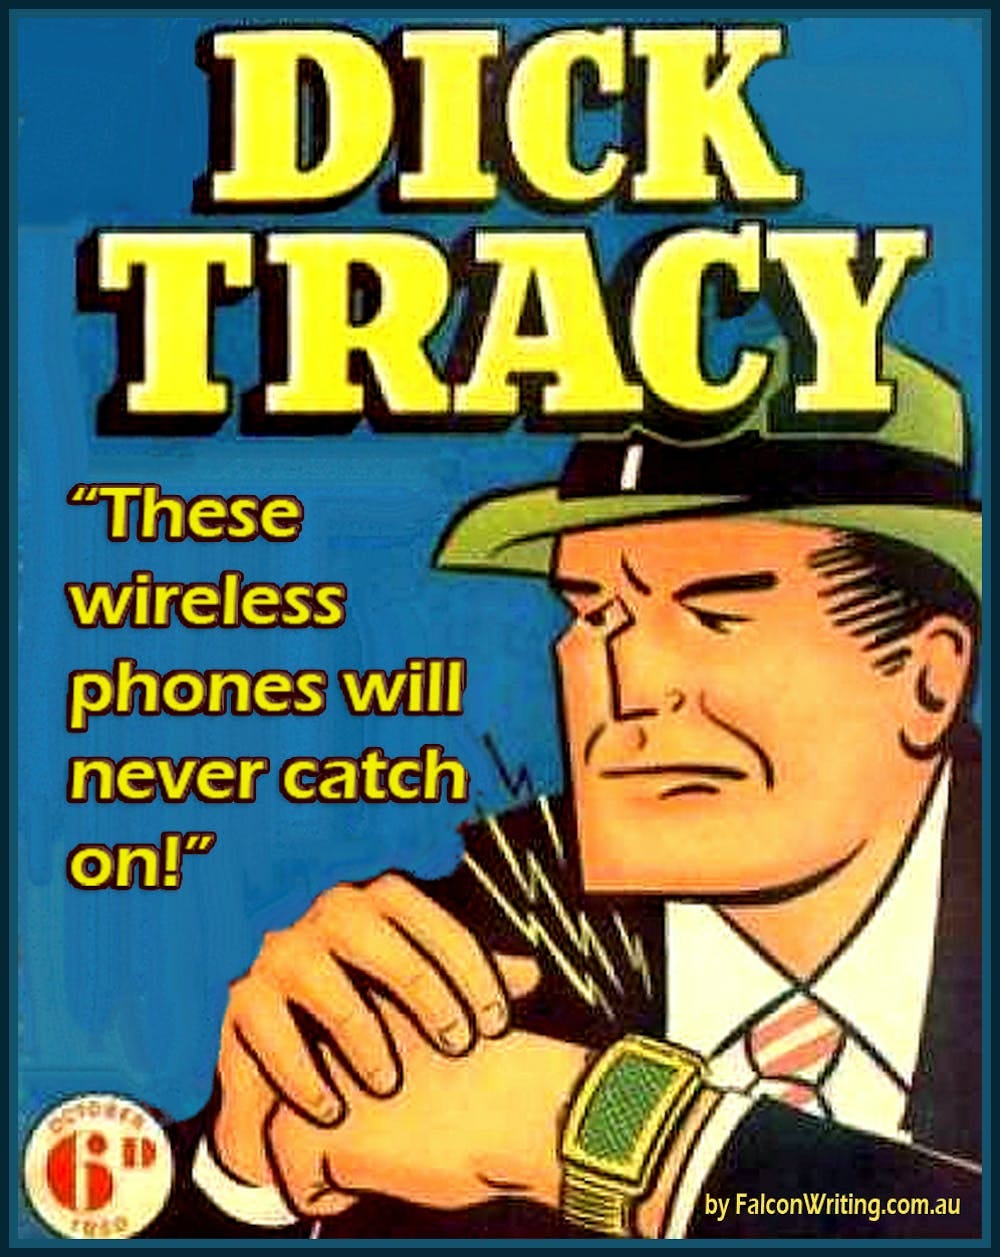 The iWatch, Dick Tracy and the kitchen sink